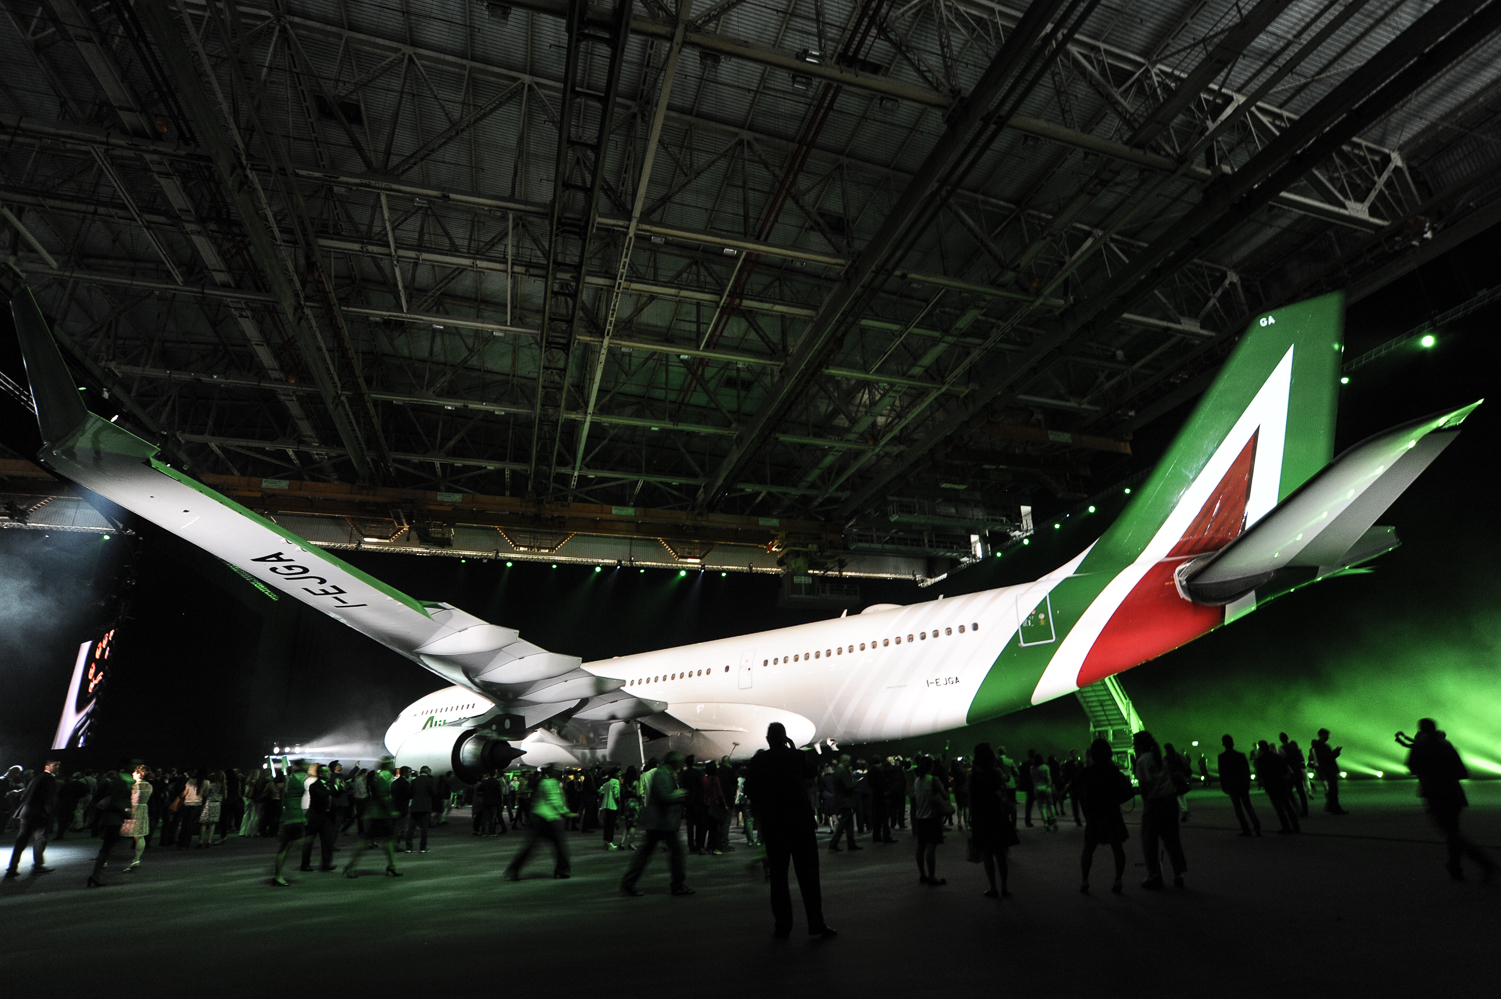 Alitalia Cabin Crew to strike over new toilet cleaning responsibilities